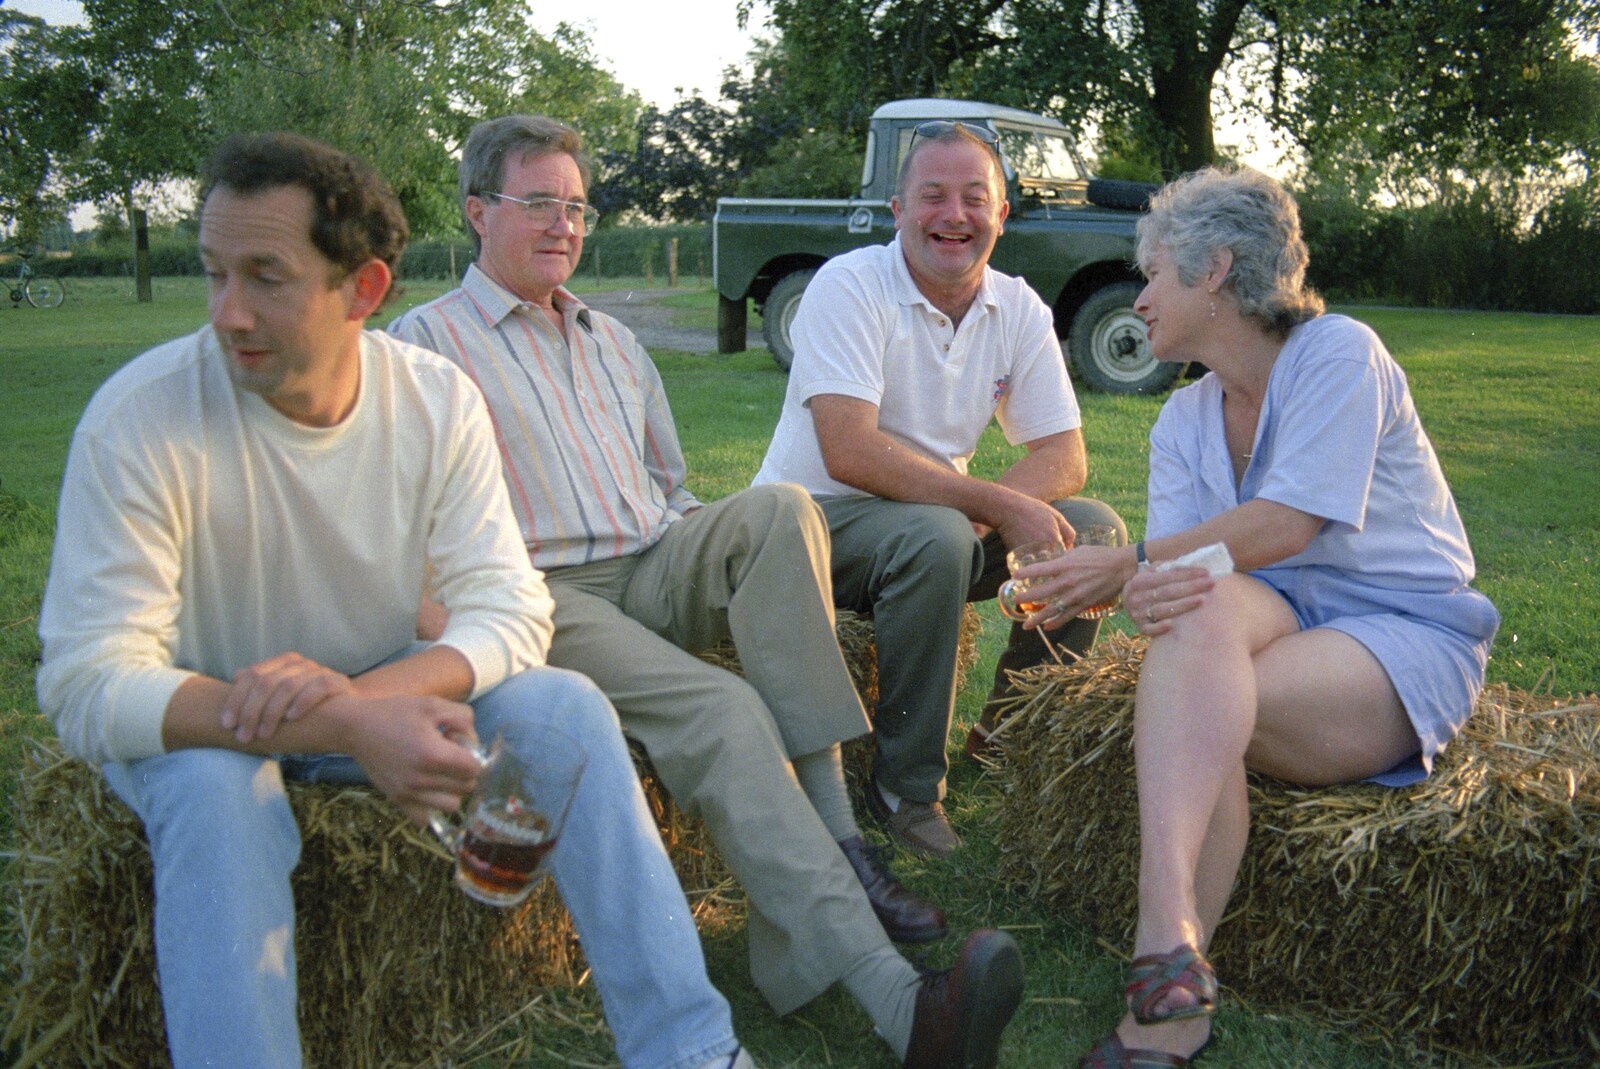 DH, Peter Allen, Ian and Spammy sit on bales from Bromestock 1 and a Mortlock Barbeque, Brome and Thrandeston, Suffolk - 24th June 1997